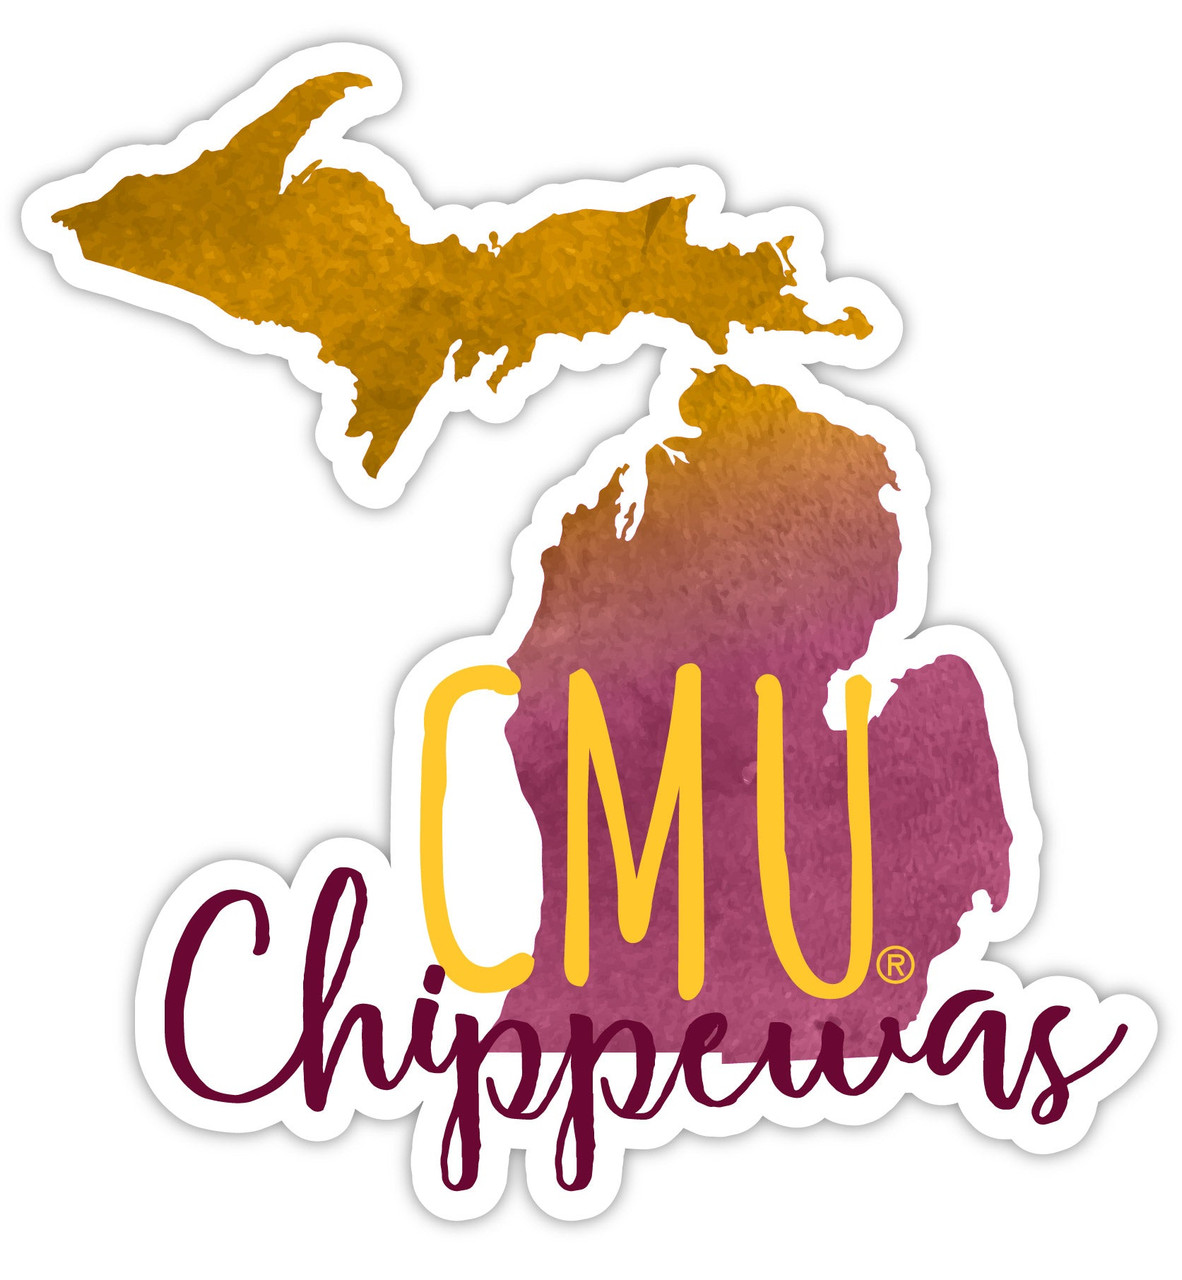 Central Michigan University Watercolor State Die Cut Decal 4-Inch